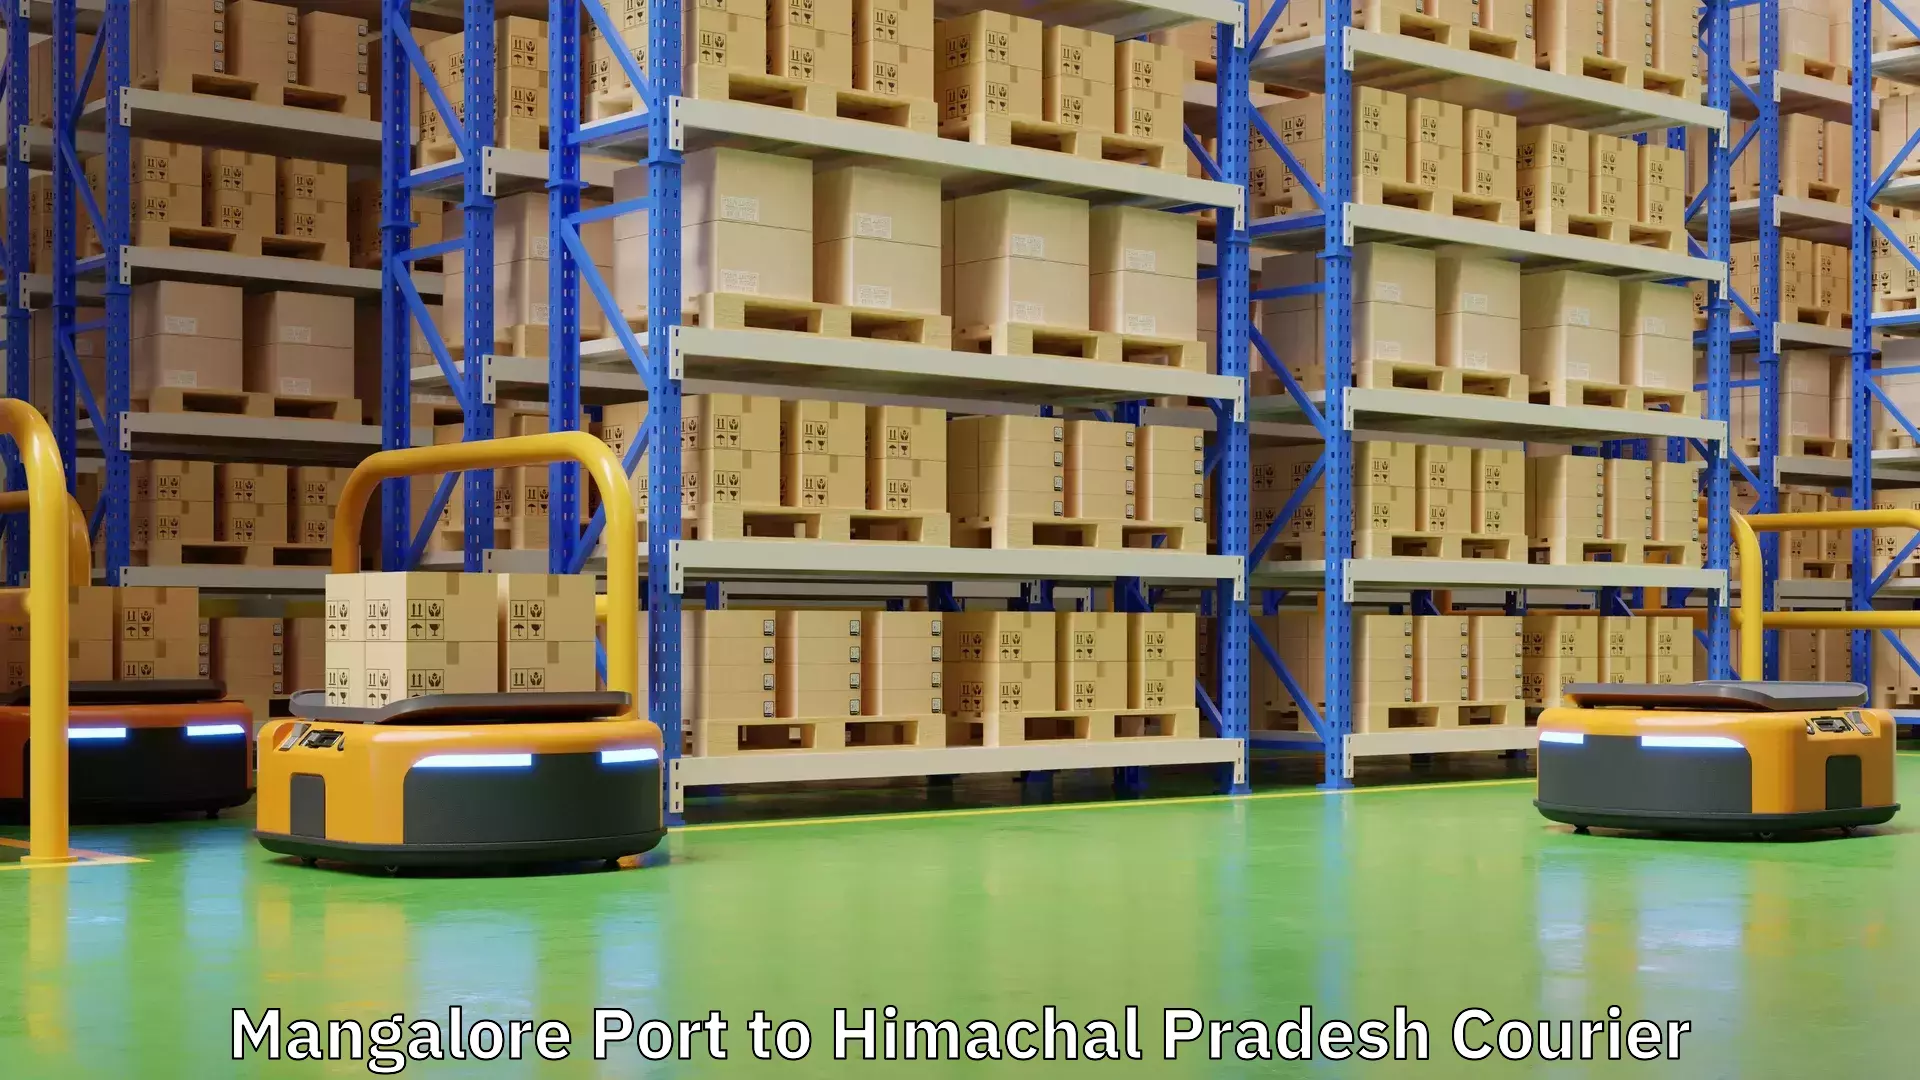 Small parcel delivery in Mangalore Port to Himachal Pradesh